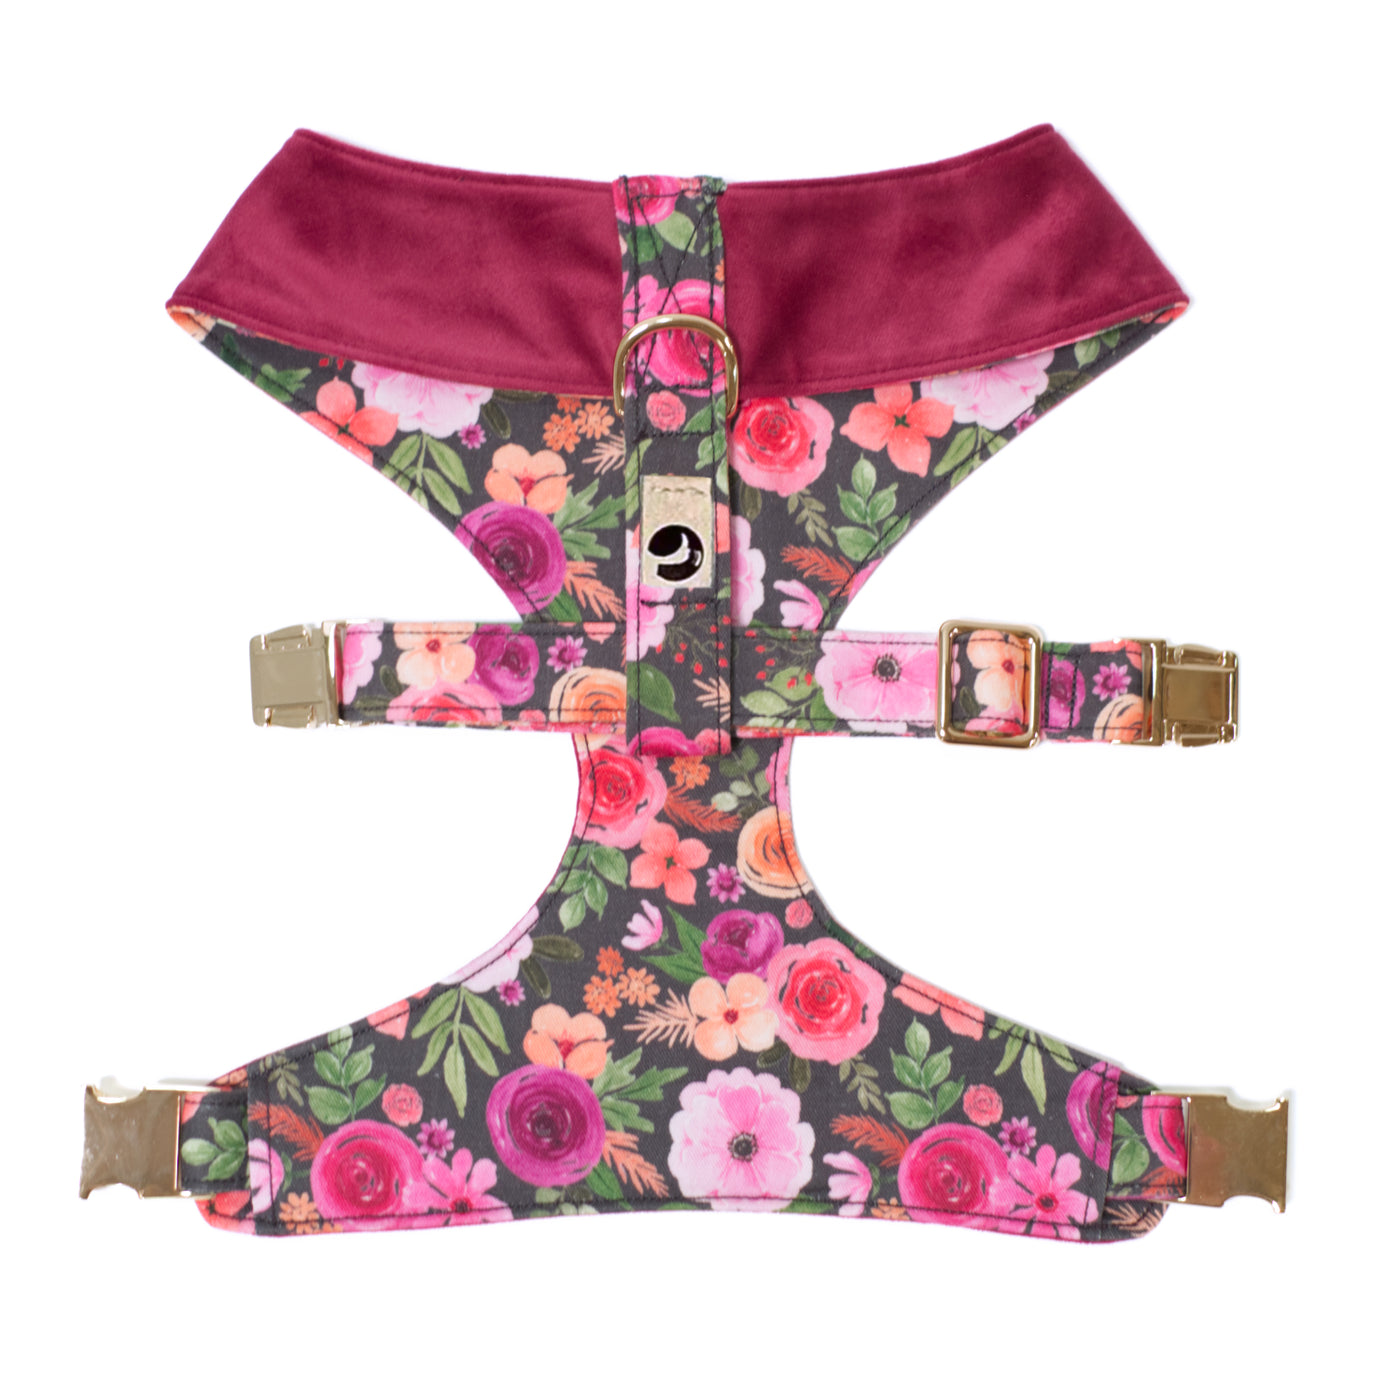 Top/back reversible dog harness in wine velvet and pink floral with gold hardware